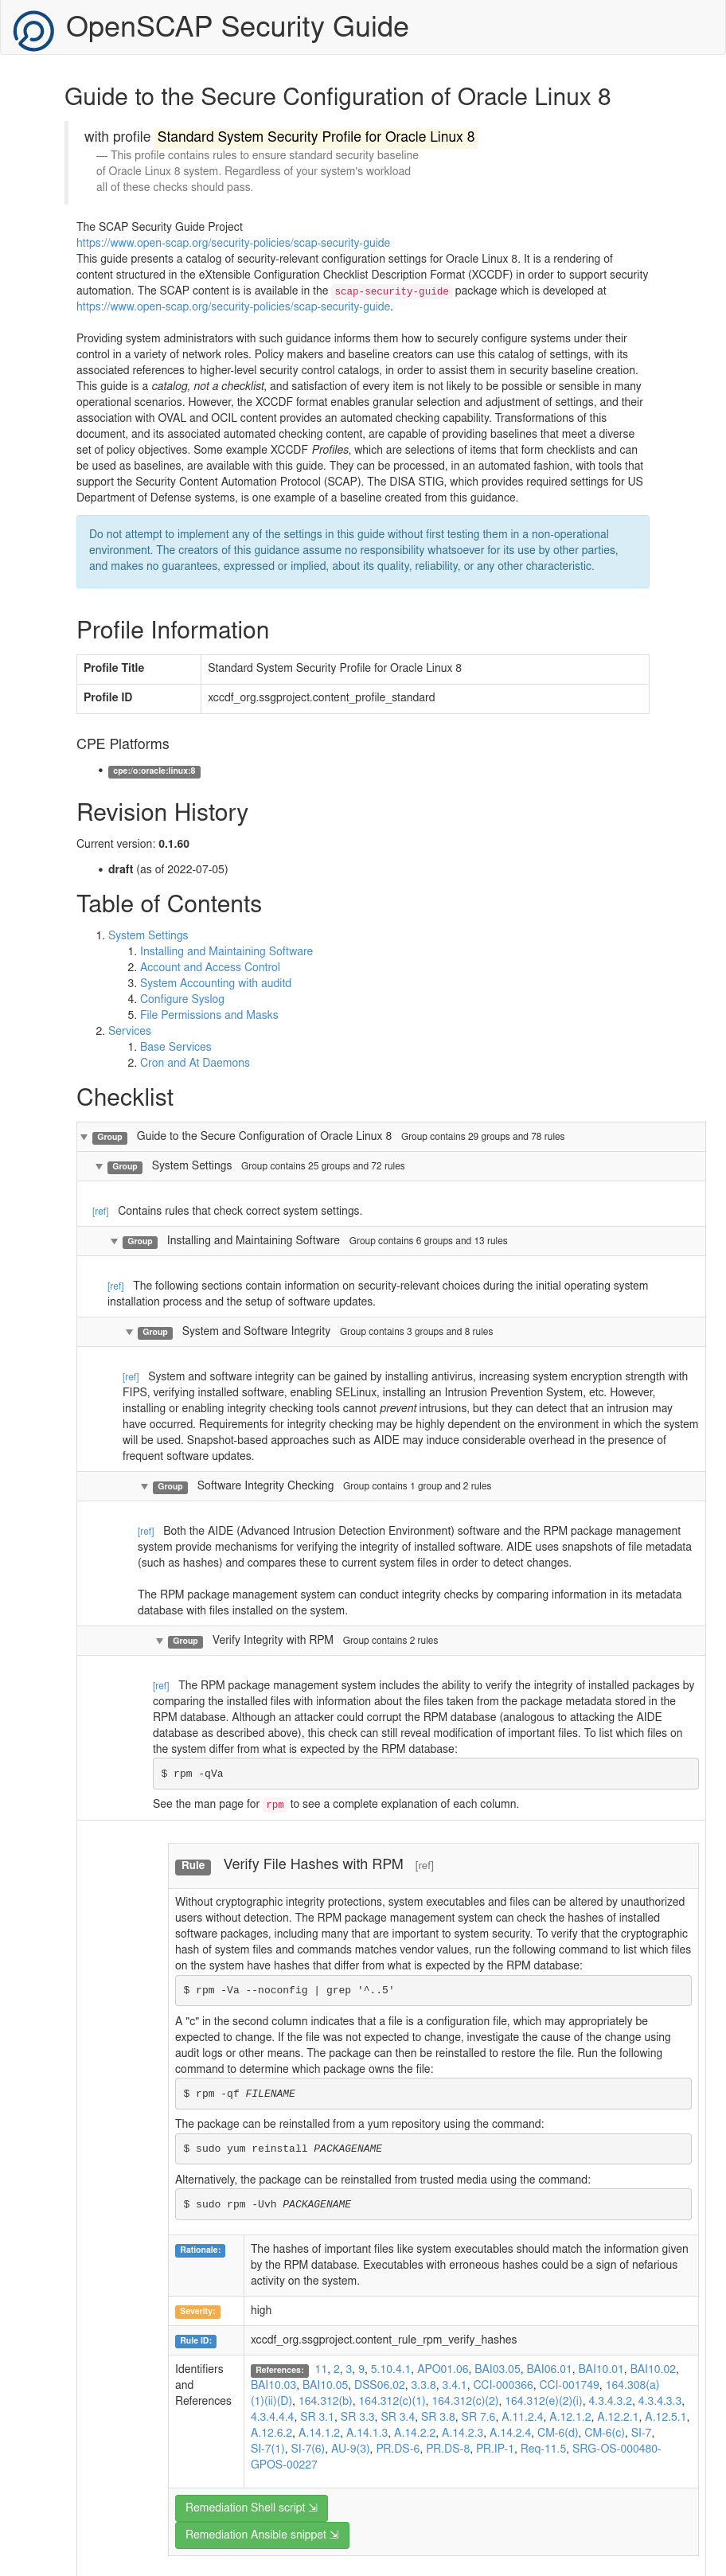 The image shows a partial view of the HTML version of a security guide generated by the oscap command. The top of the report contains the guide's title and description. The table of contents is listed, followed by the checklist that is used for generating the guide.